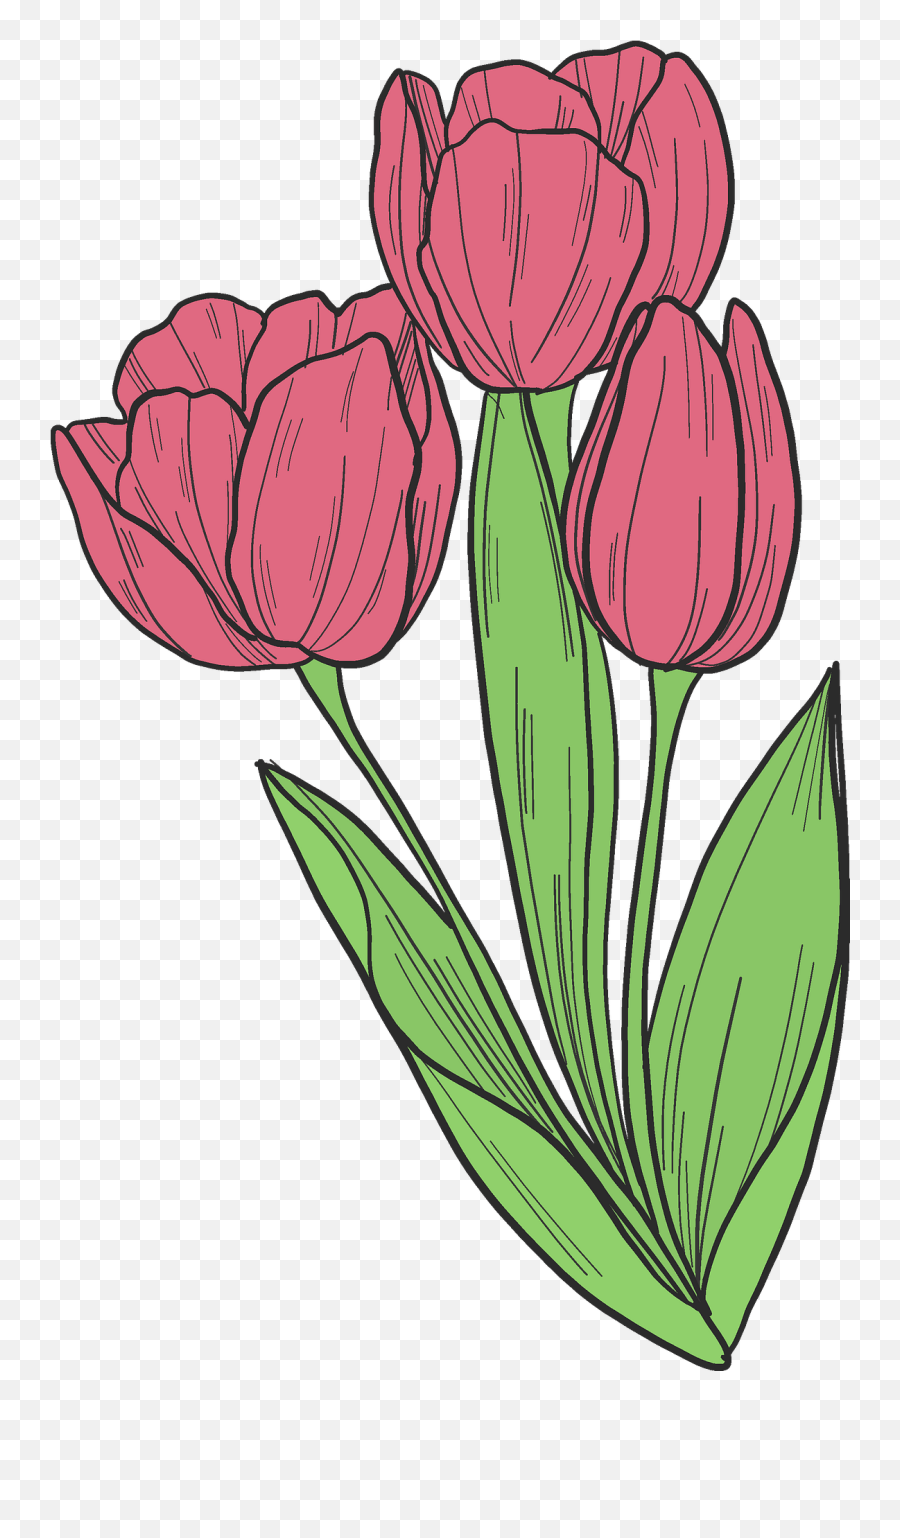 Bouquet Of Tulips Clipart - Floral Emoji,Tulips Clipart